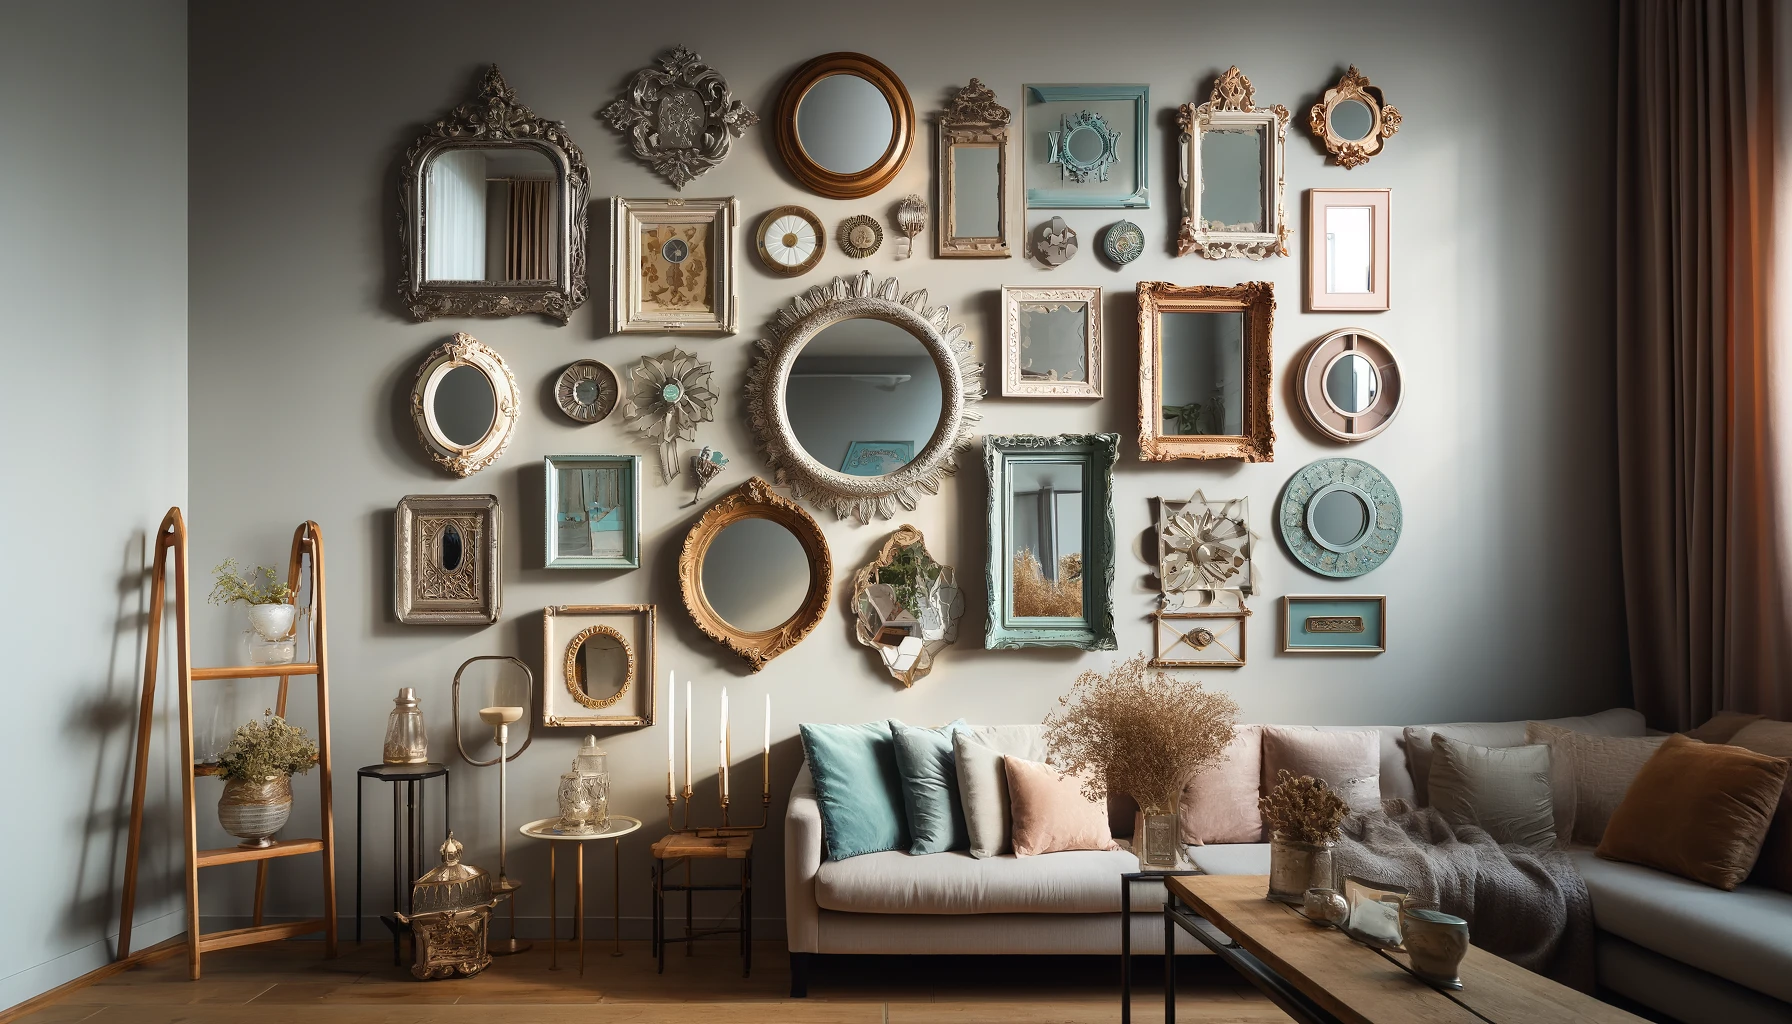 Here's an image showcasing an elegant wall display featuring a collection of thrifted mirrors. Each mirror has a unique frame that has been revived and repainted, varying in shapes and sizes and adorned in a range of colors, including metallic and pastel shades. Some frames are distressed, adding rustic charm, while others are sleek and modern. This eclectic arrangement creates a striking focal point in a stylish living room setting.